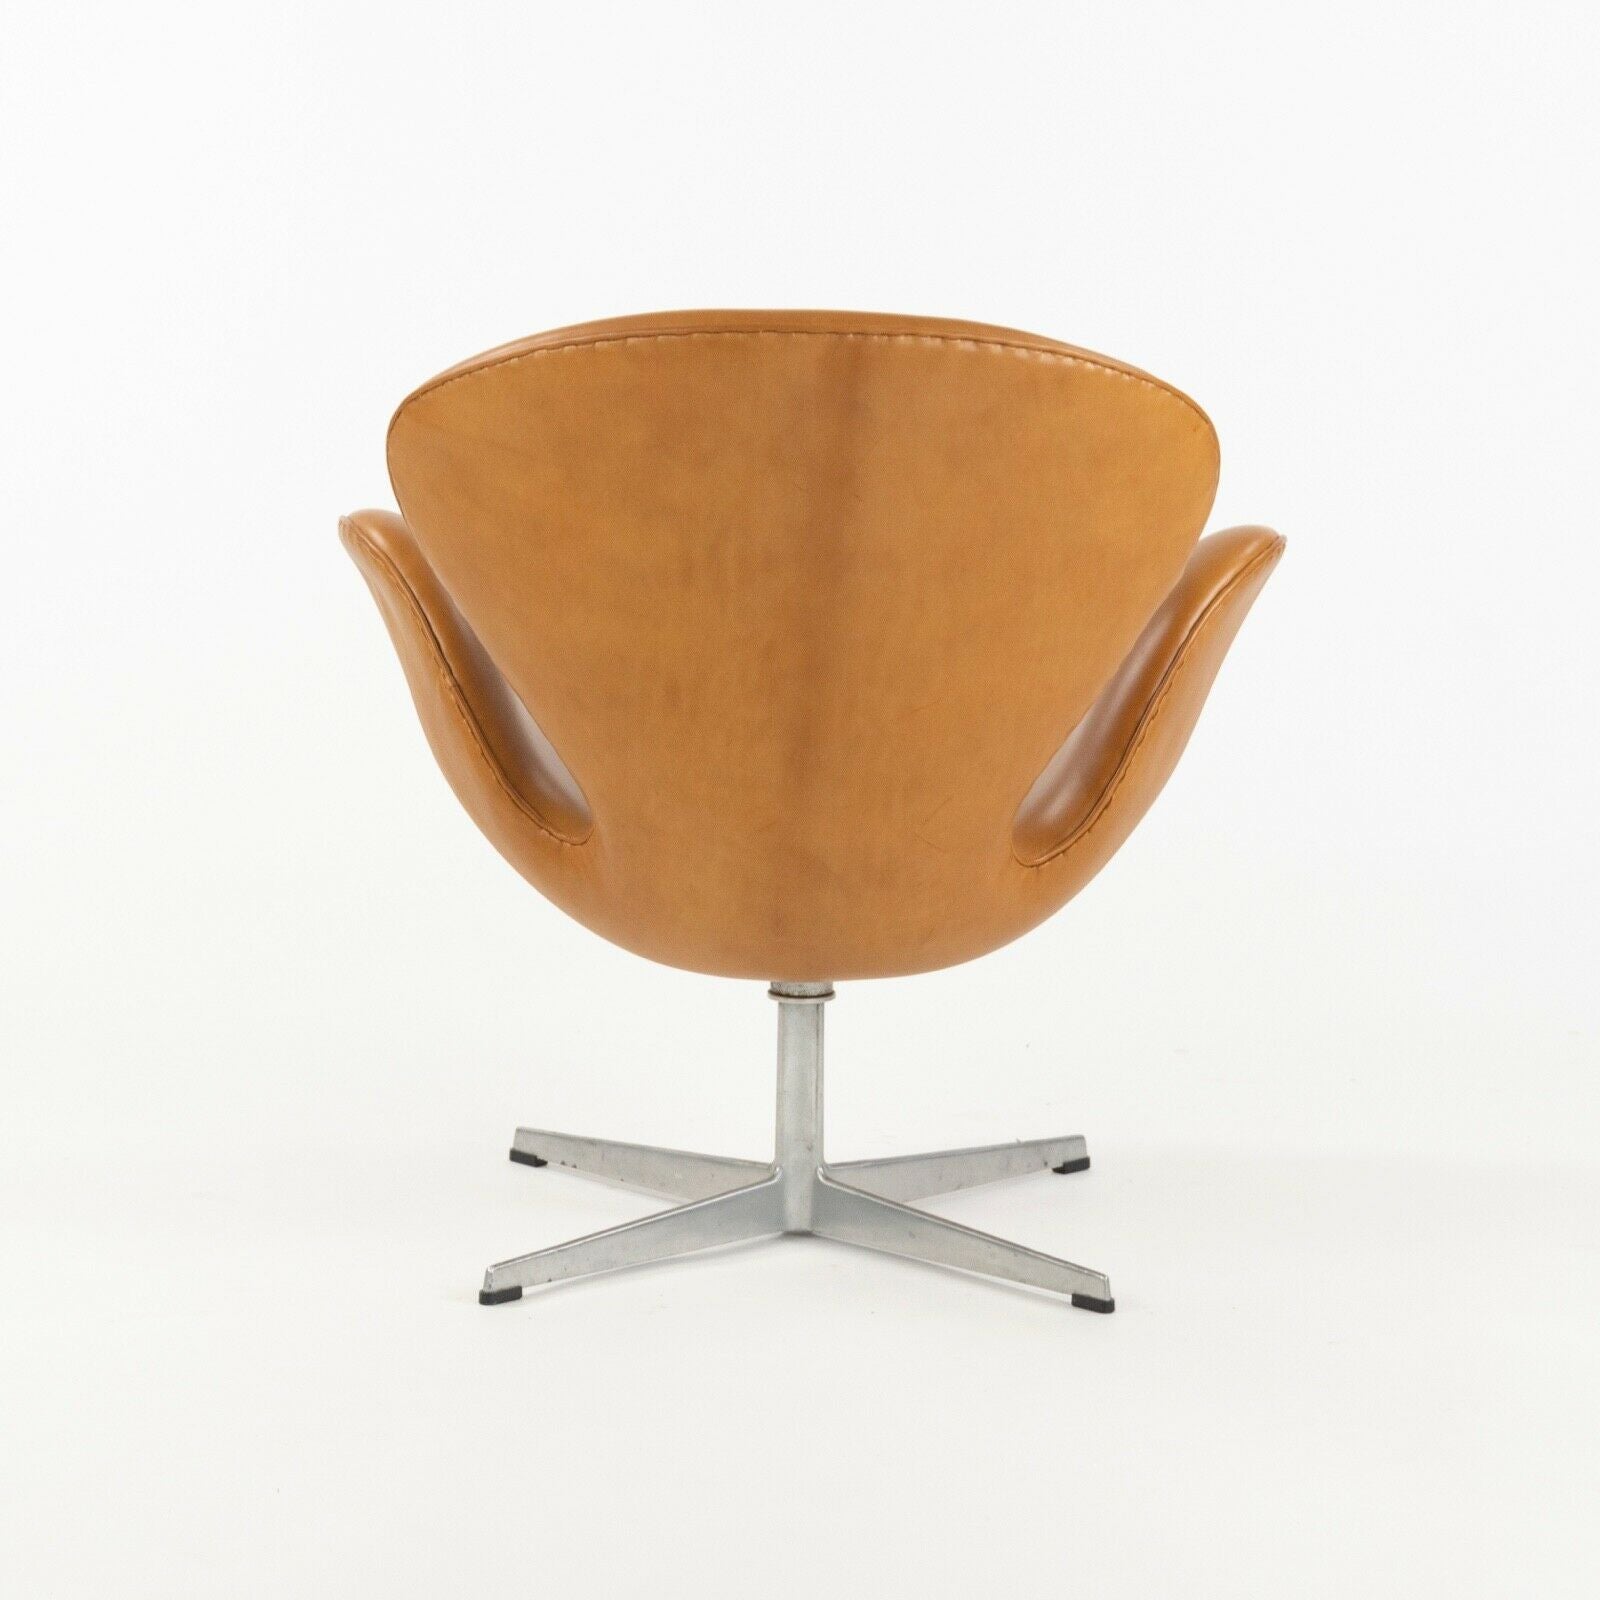 SOLD 1960s Arne Jacobson for Fritz Hansen Swan Chairs in Cognac Leather